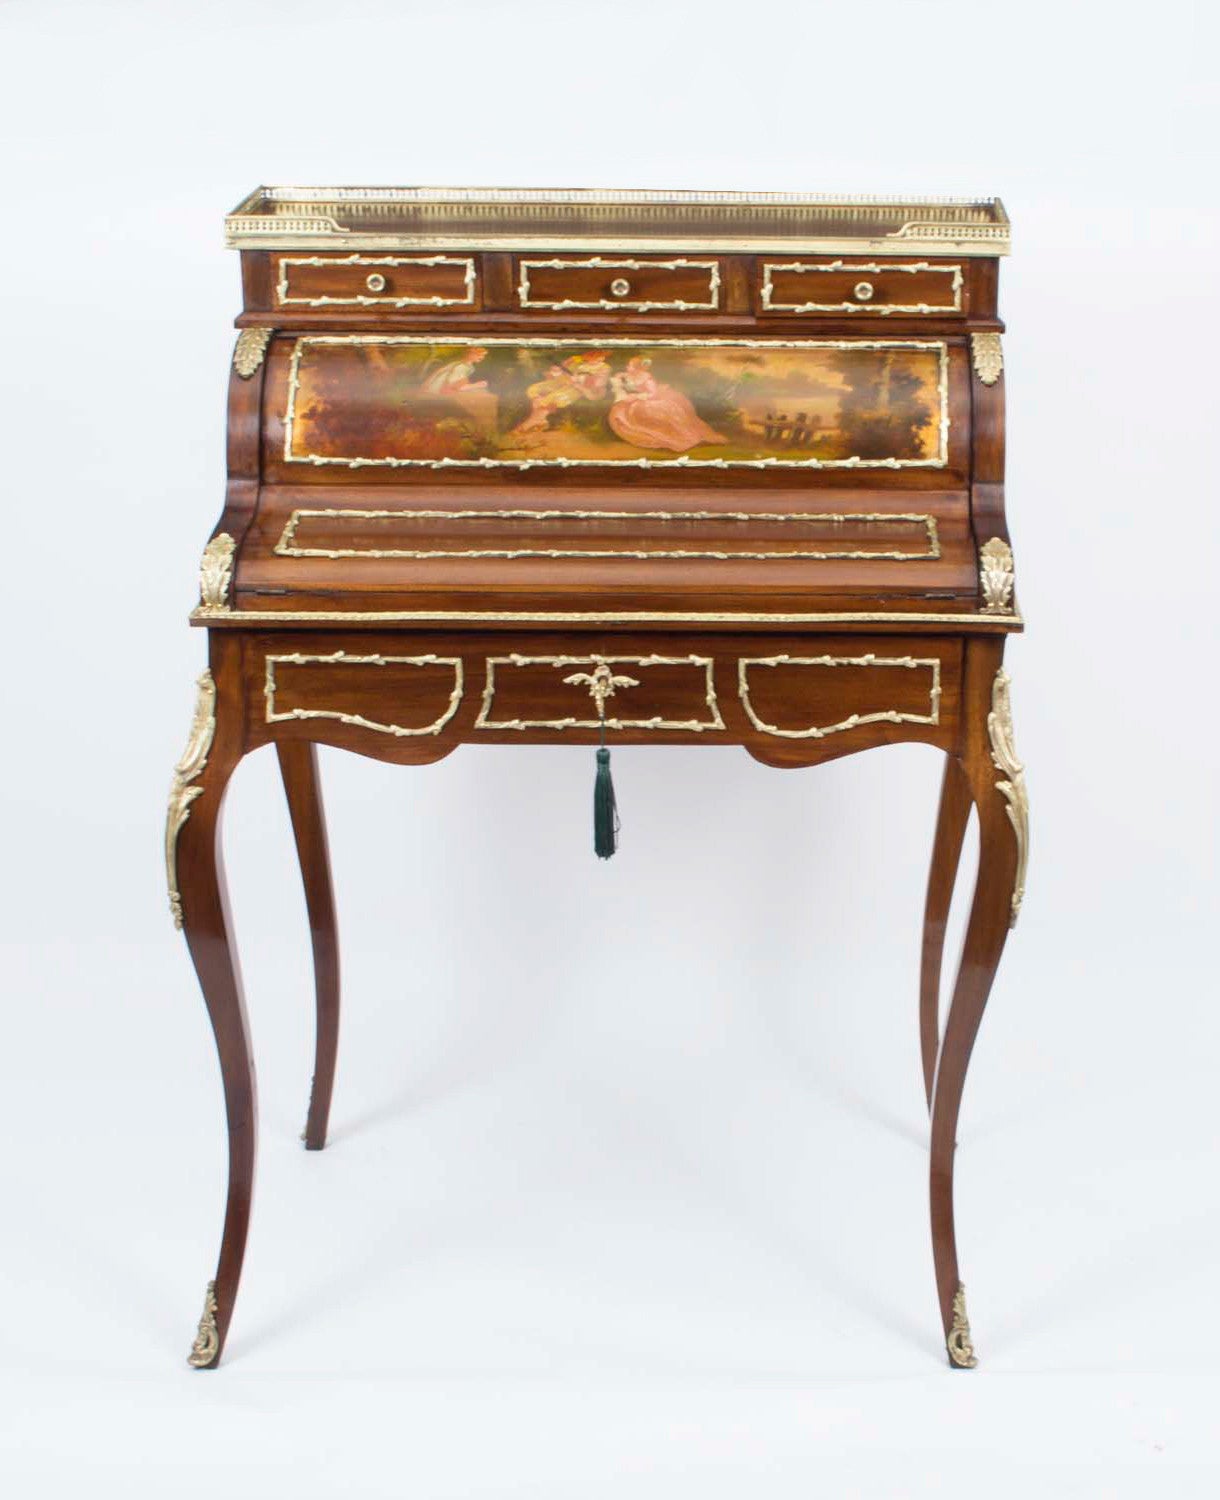 This is a superb antique French mahogany and ormolu mounted Vernis Martin cylinder bureau de dame, Circa 1880 in date. 

The shaped frieze drawer opens and rotates the cylinder to reveal a mahogany three drawer interior. The cylinder is decorated